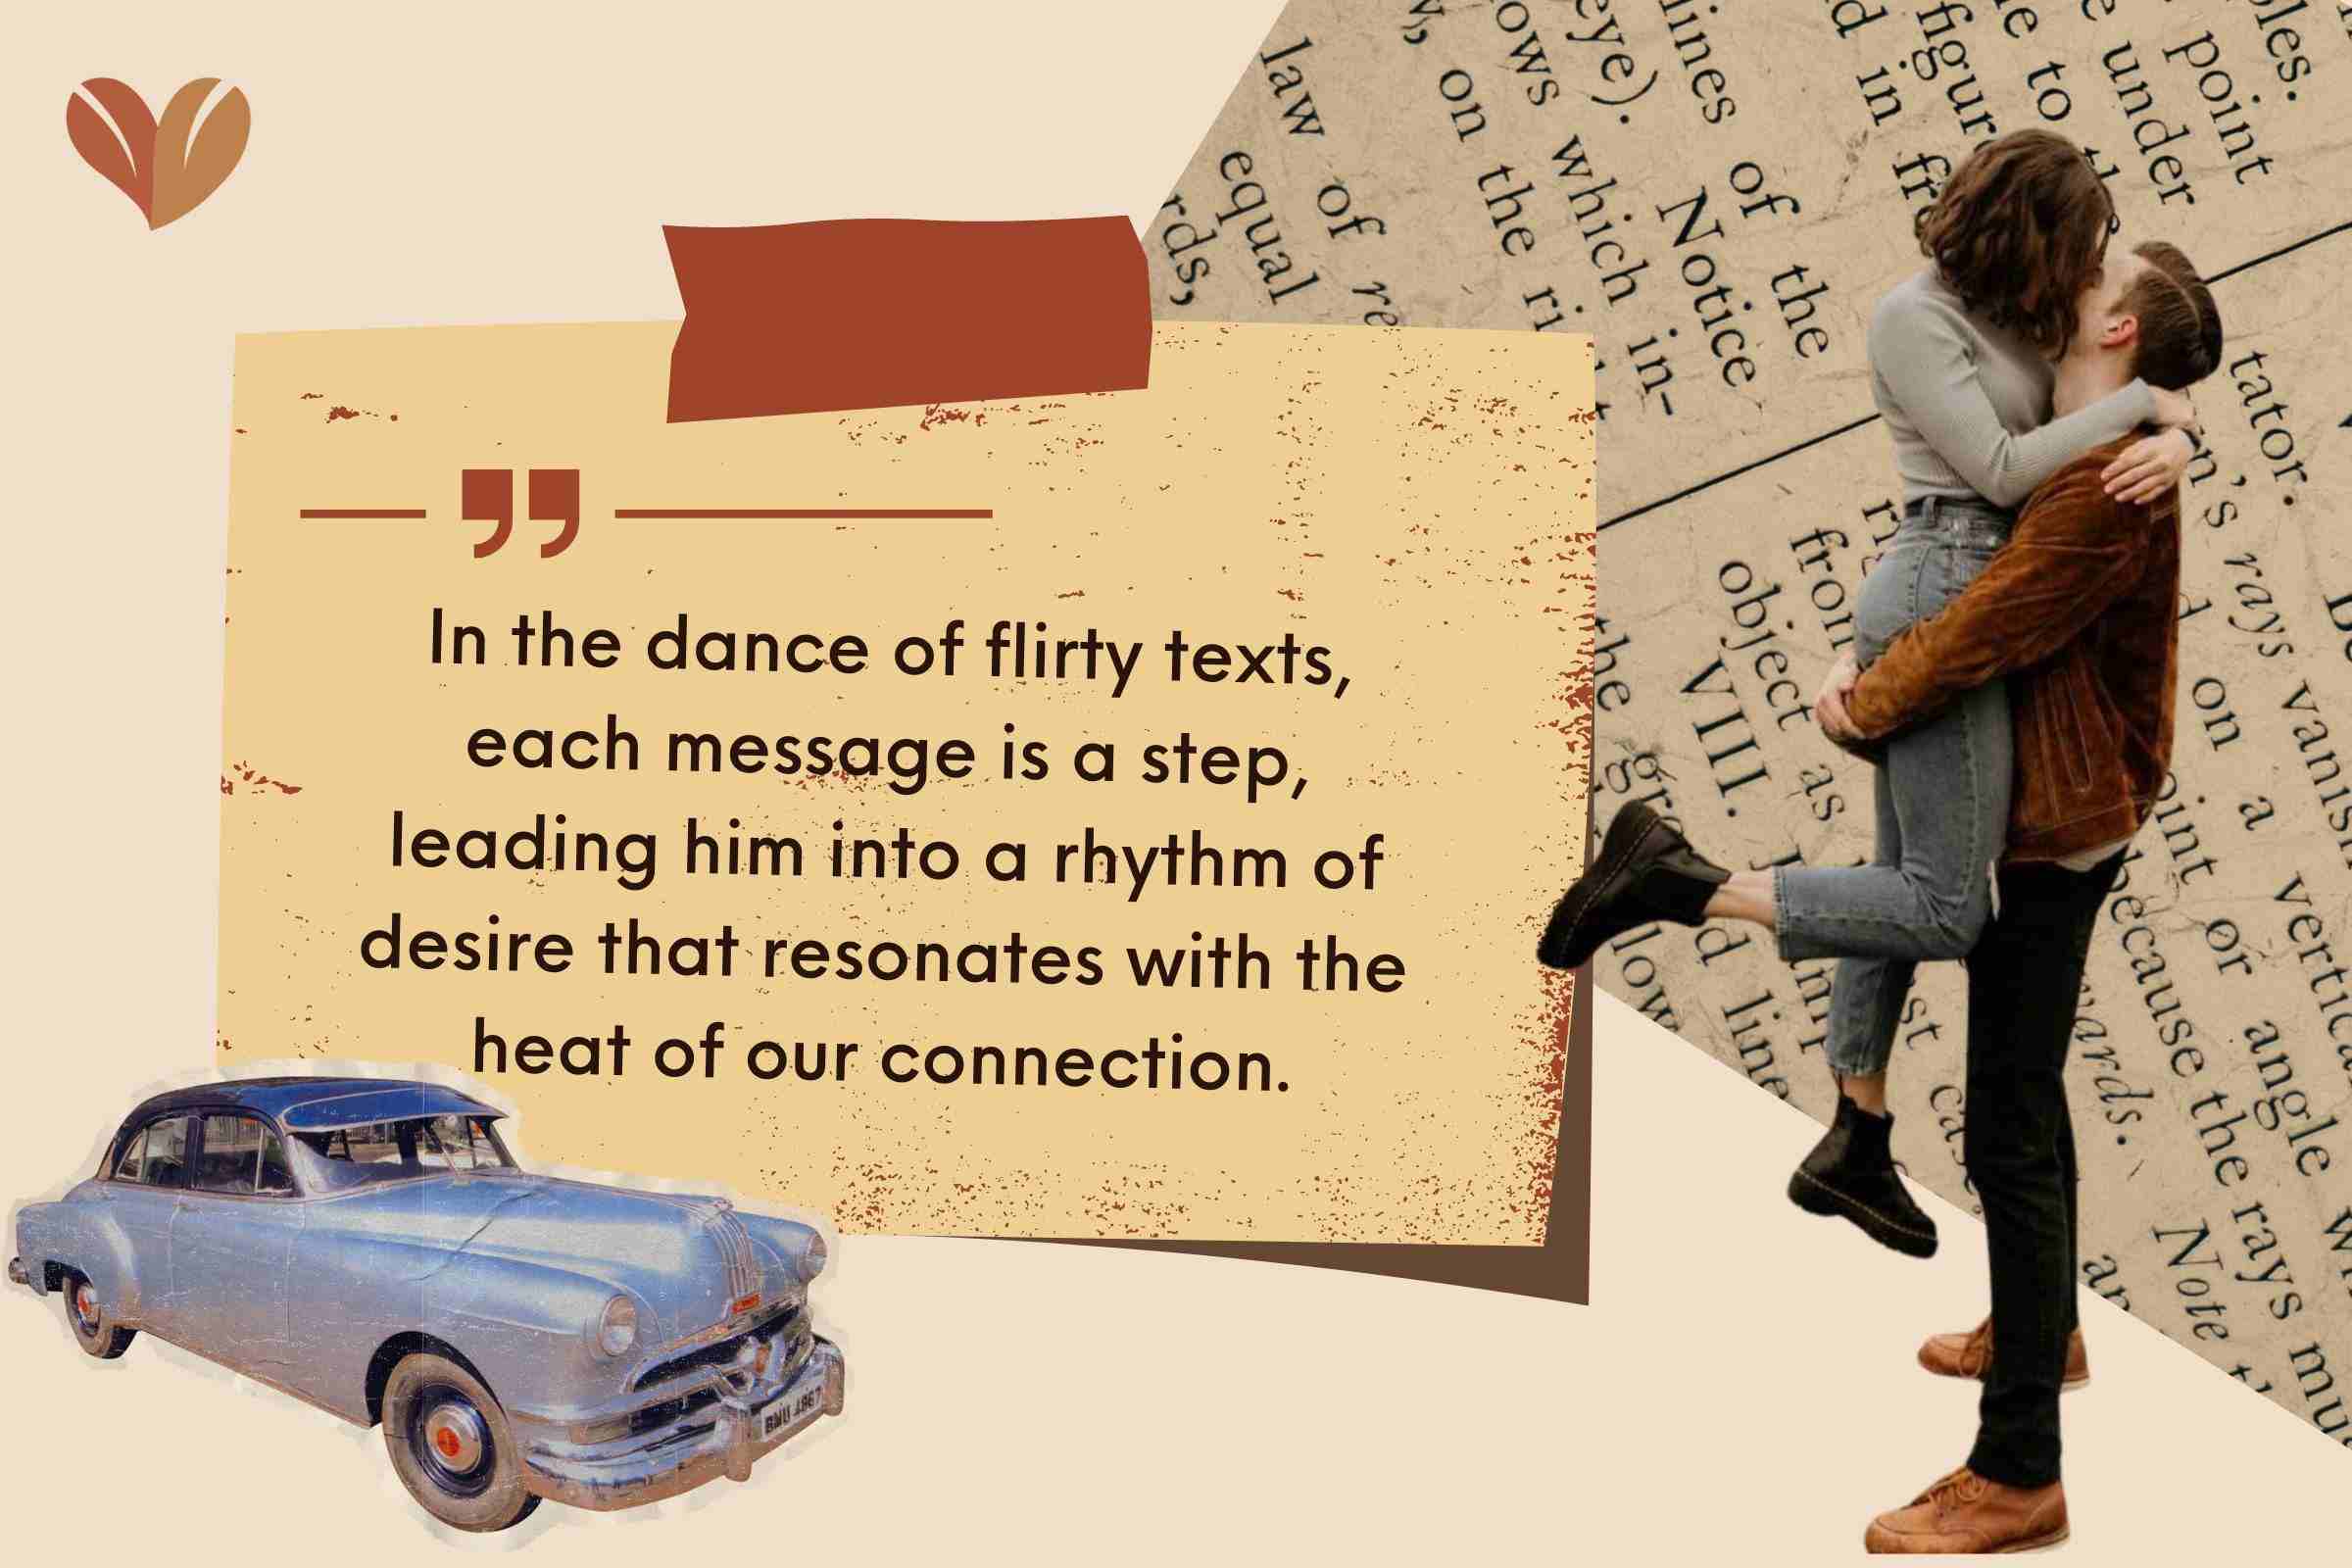 In the dance of flirty texts, each message is a step, leading him into a rhythm of desire that resonates with the heat of our connection.